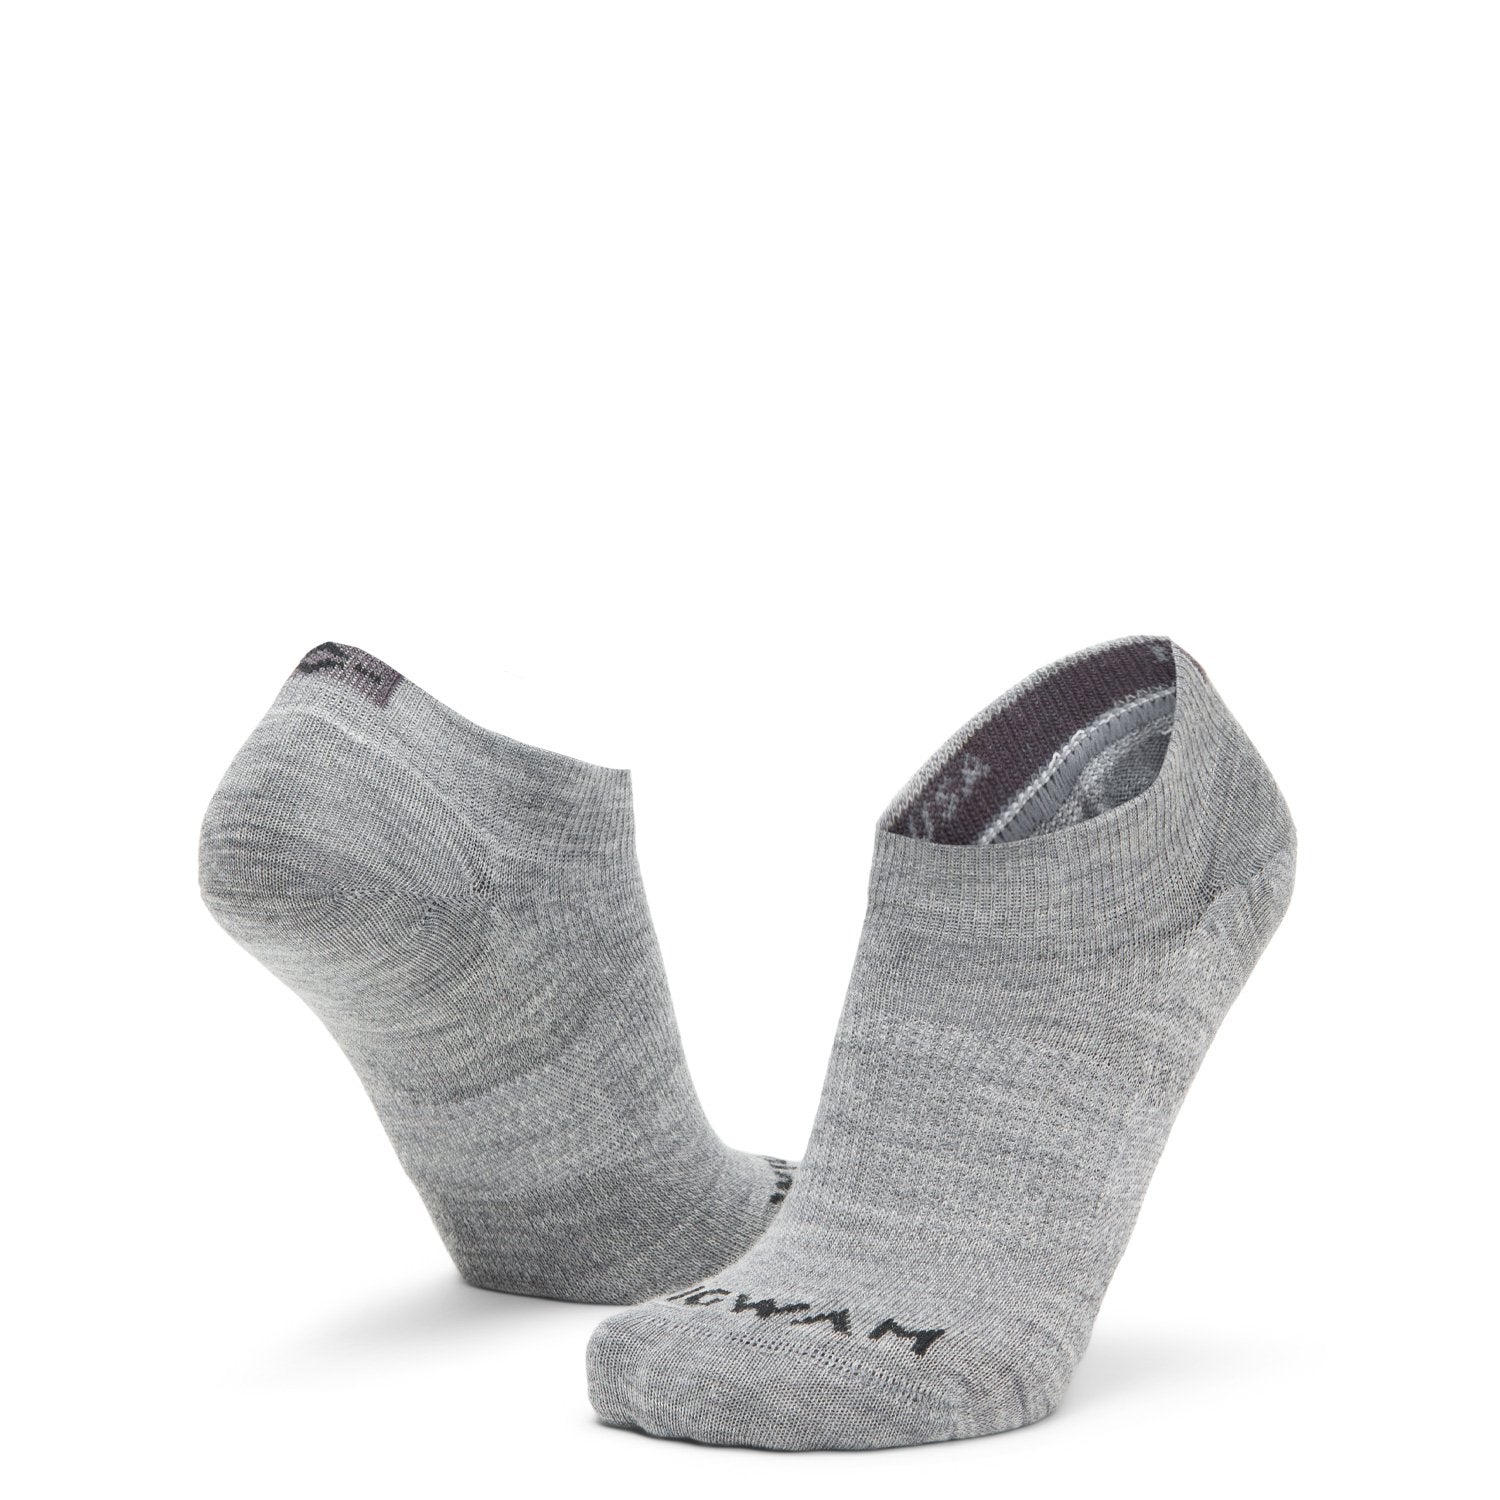 Axiom No Show Sock With Merino Wool - Grey full product perspective - made in The USA Wigwam Socks